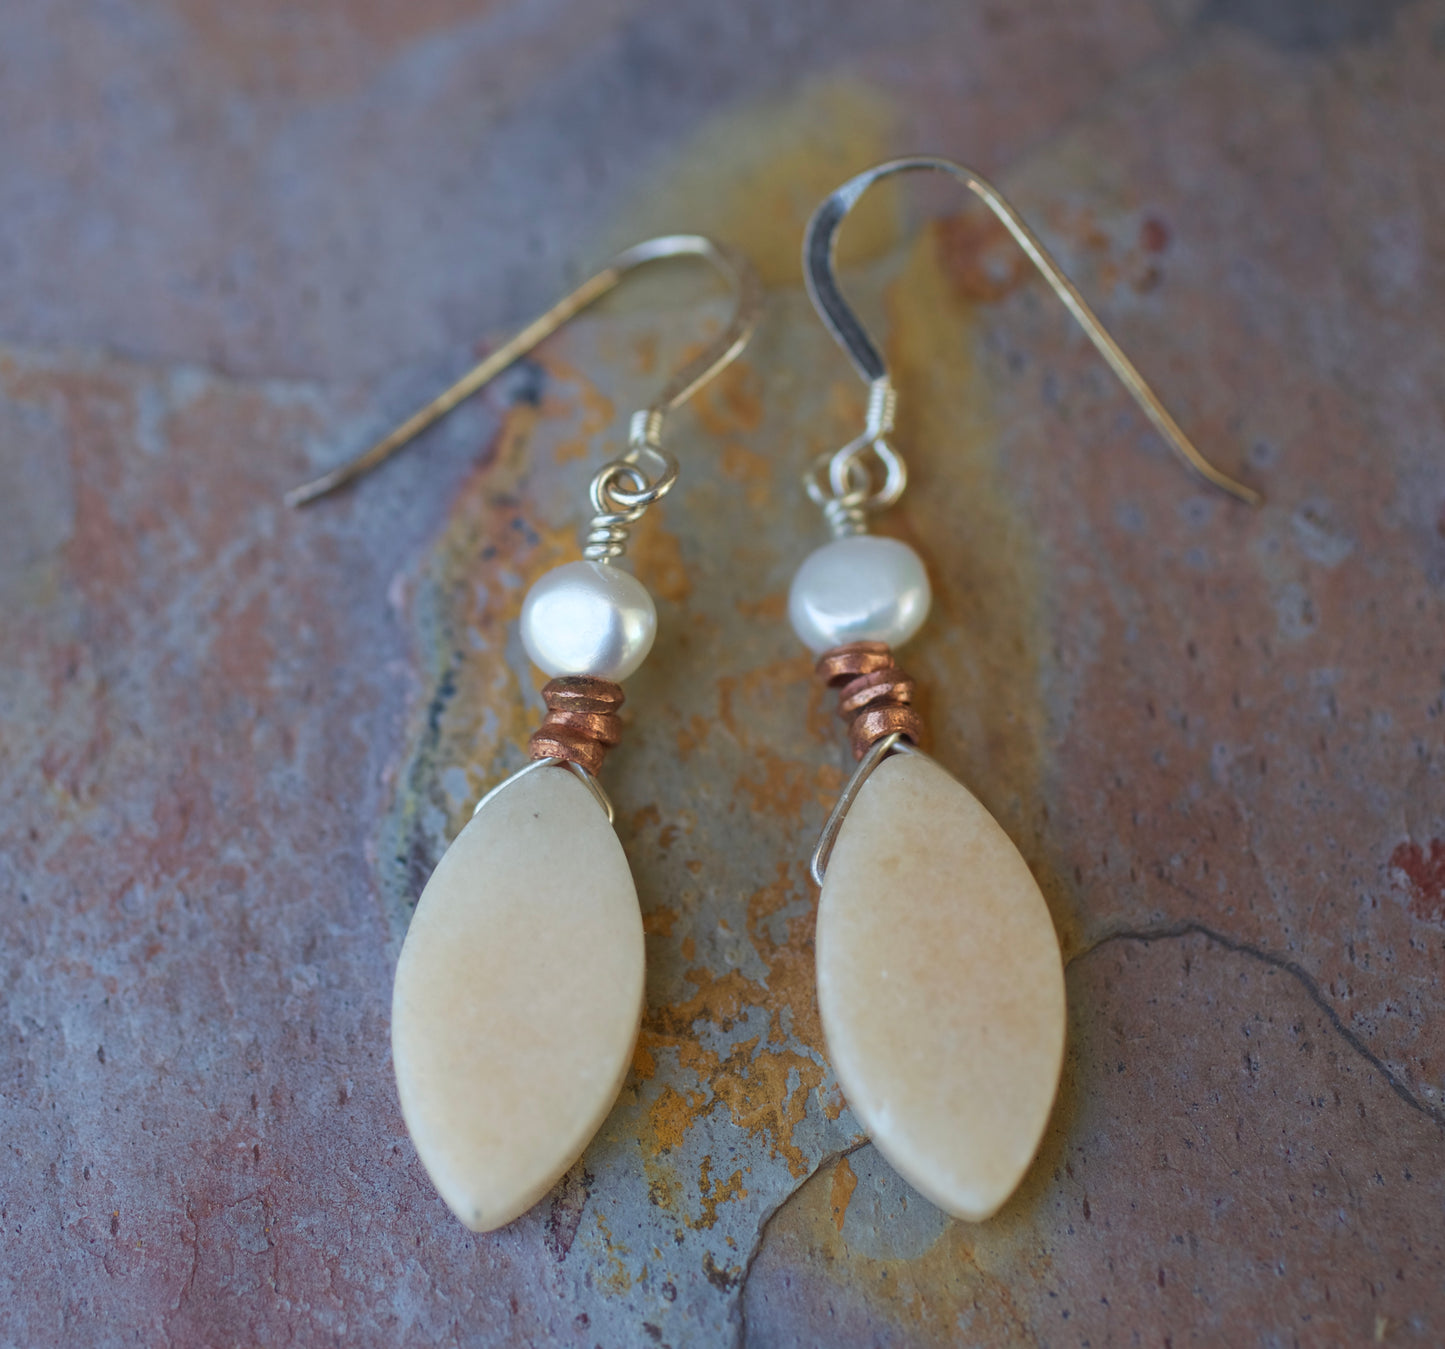 Sale! Freshwater Pearl, Copper, Peach Quartz, and Sterling Silver Earrings